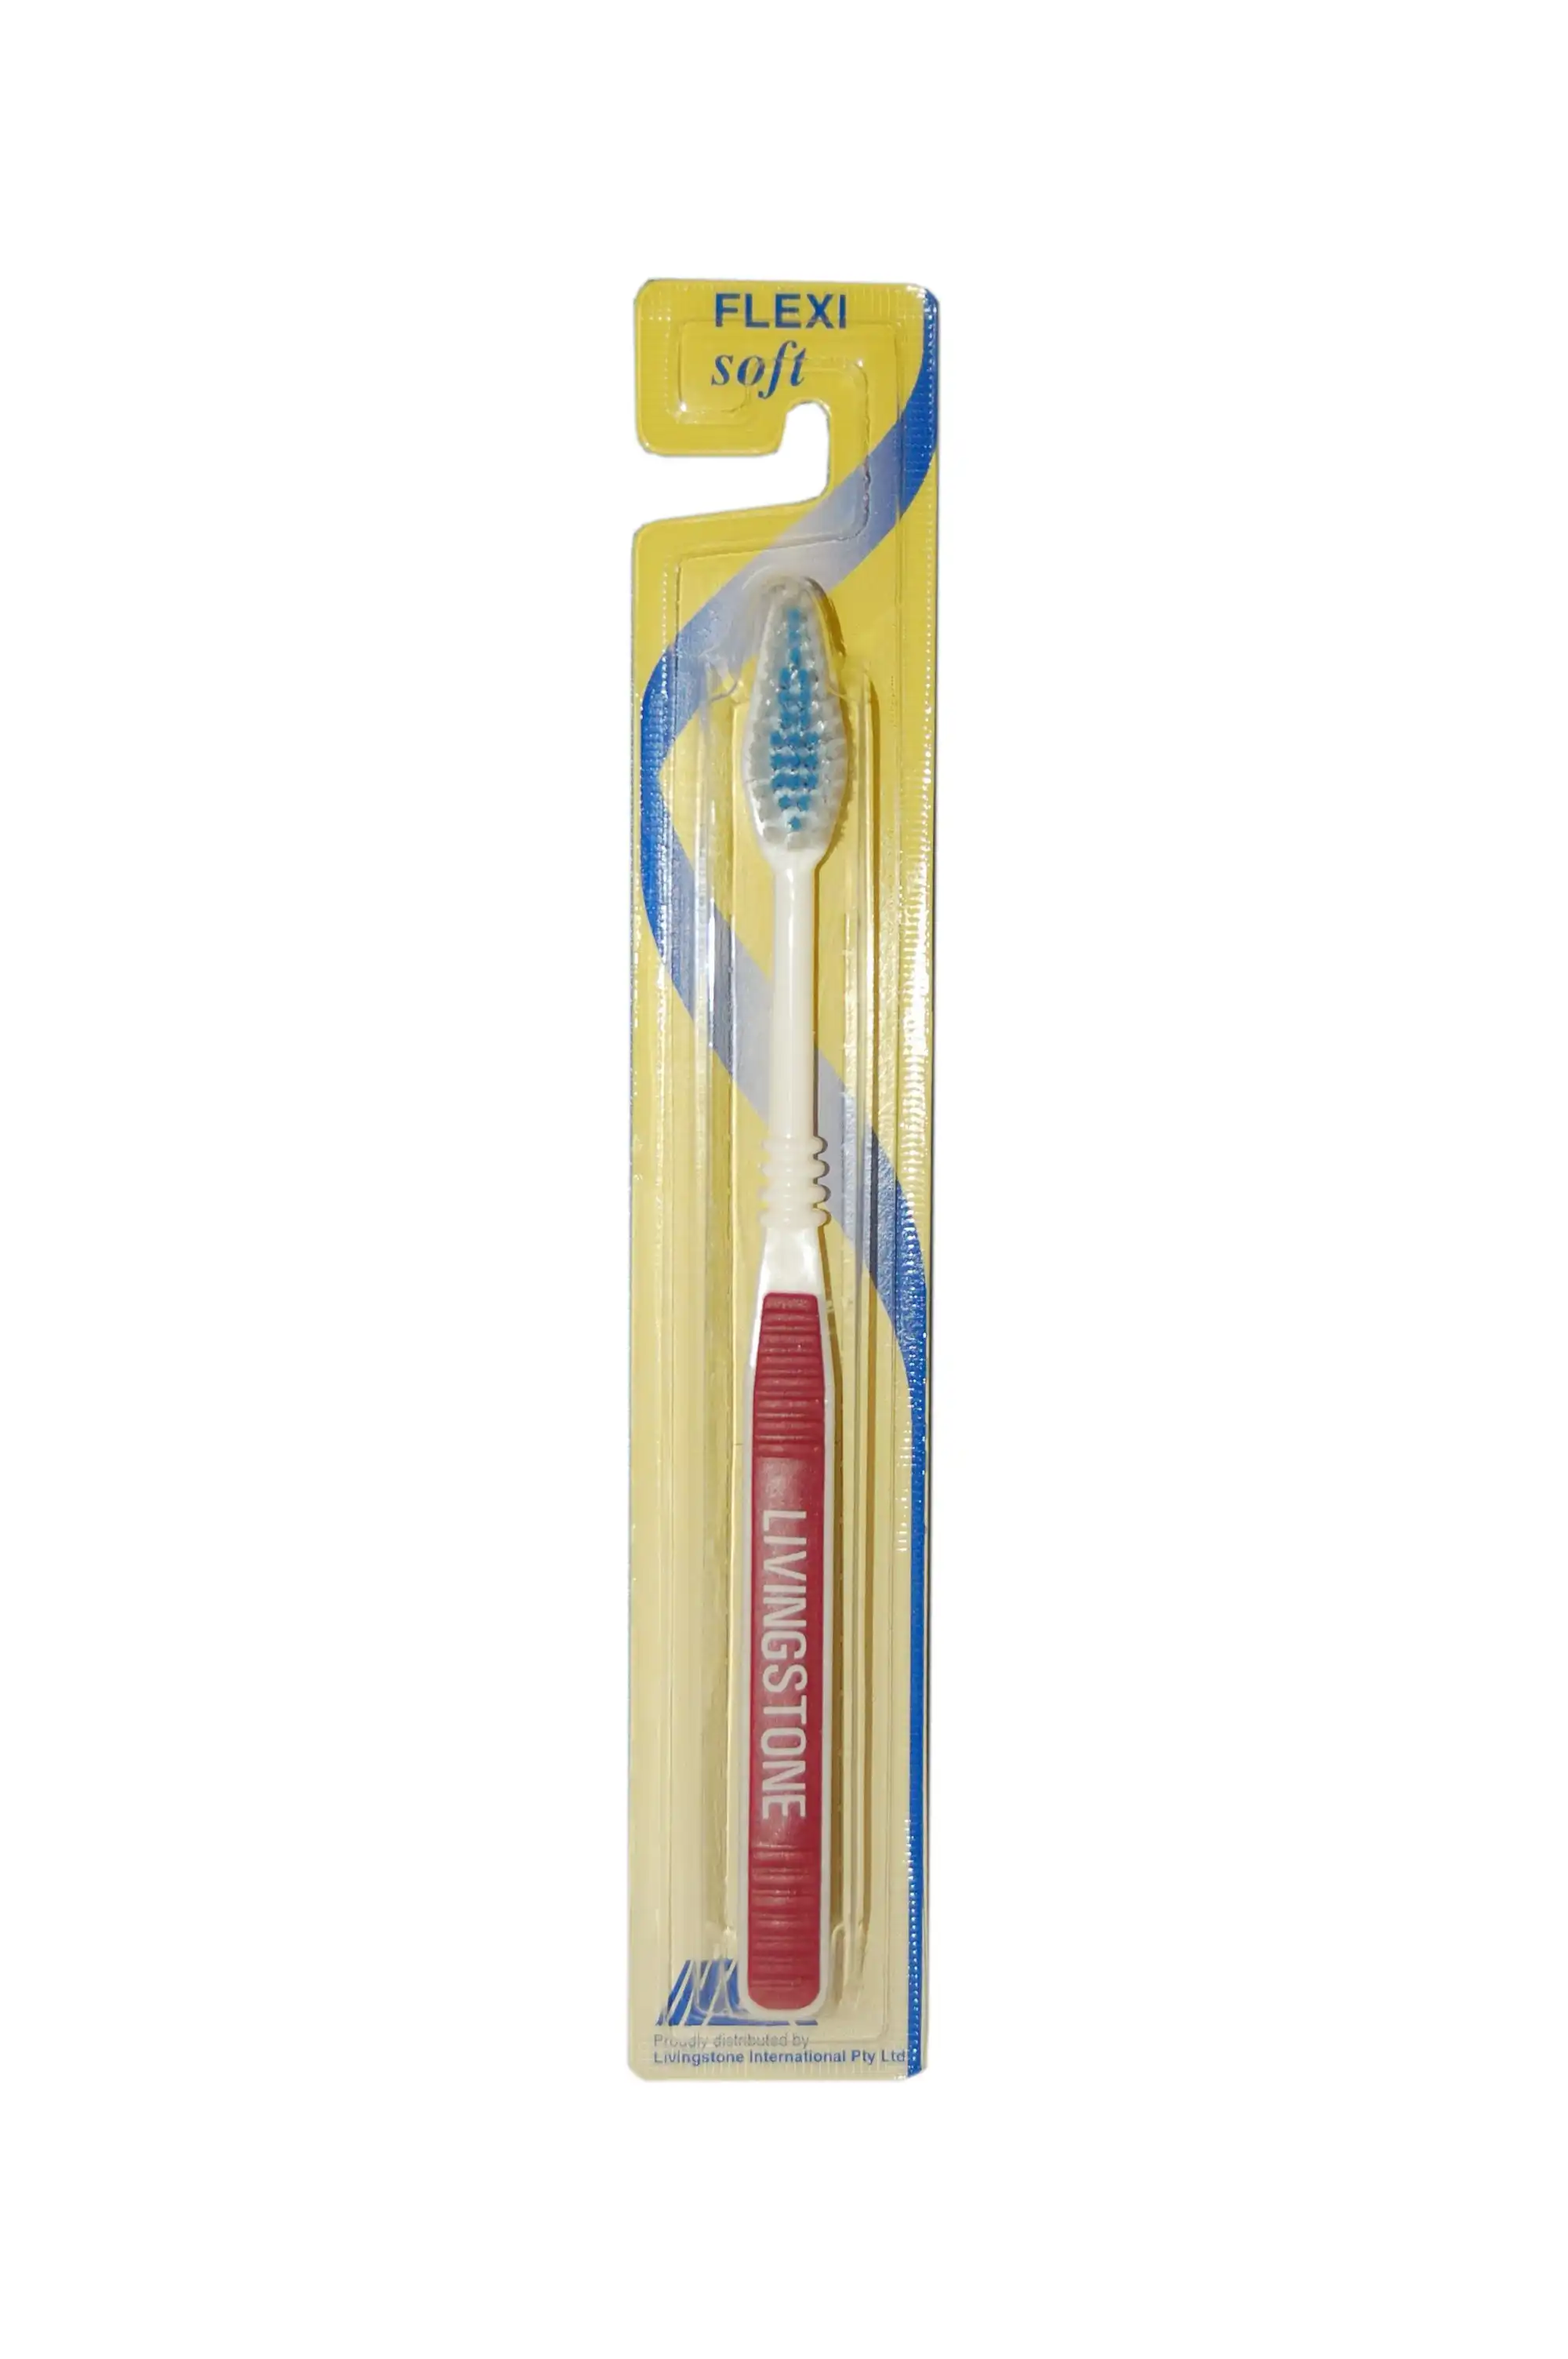 Livingstone Special White Toothbrush Adult Flexi Head Soft Bristles 24 Pack